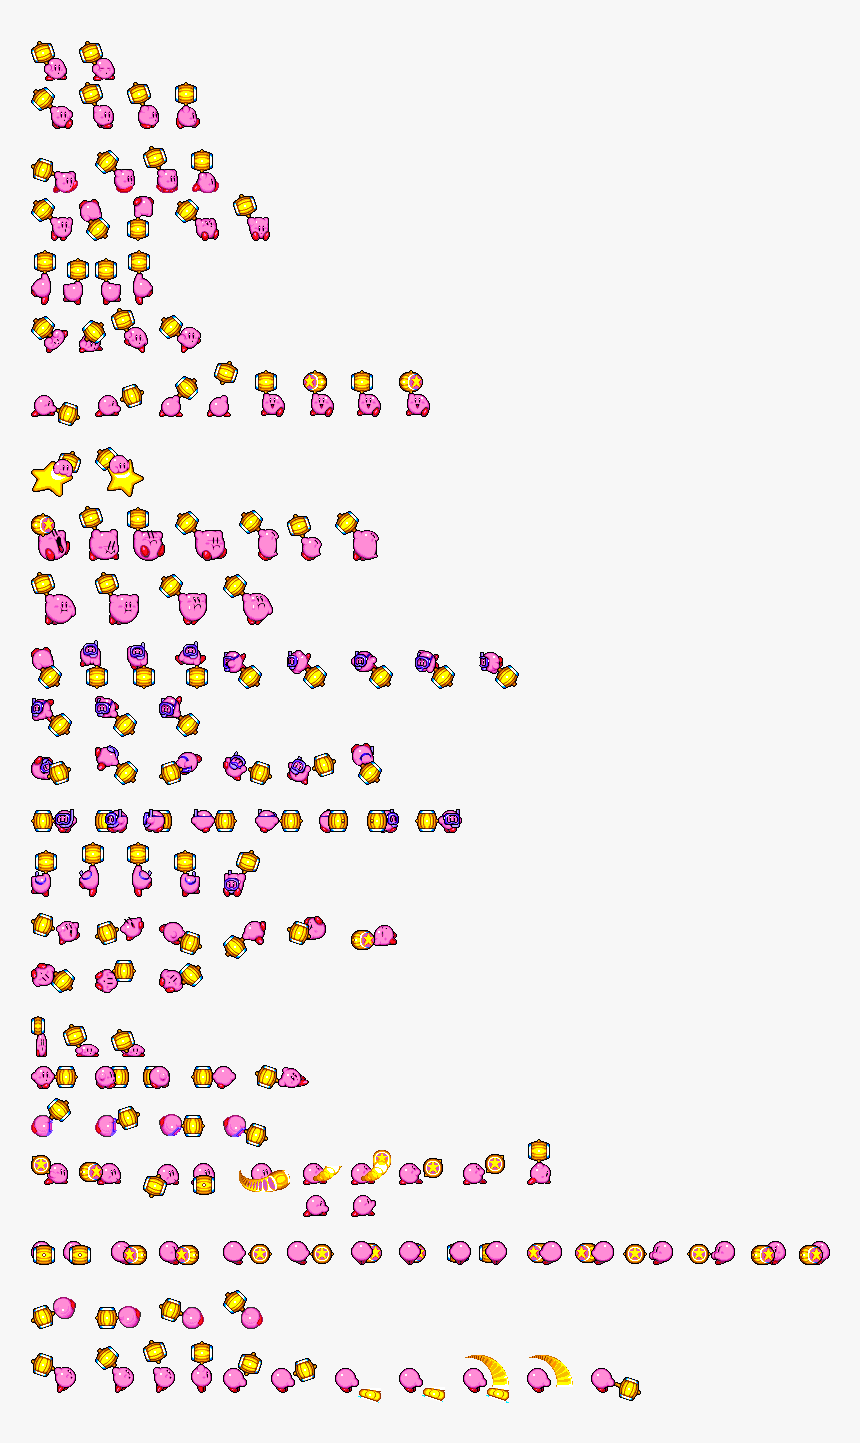 Transparent Kirby Sprite Png - Kirby Hammer Sprite Sheet, Png Download, Free Download